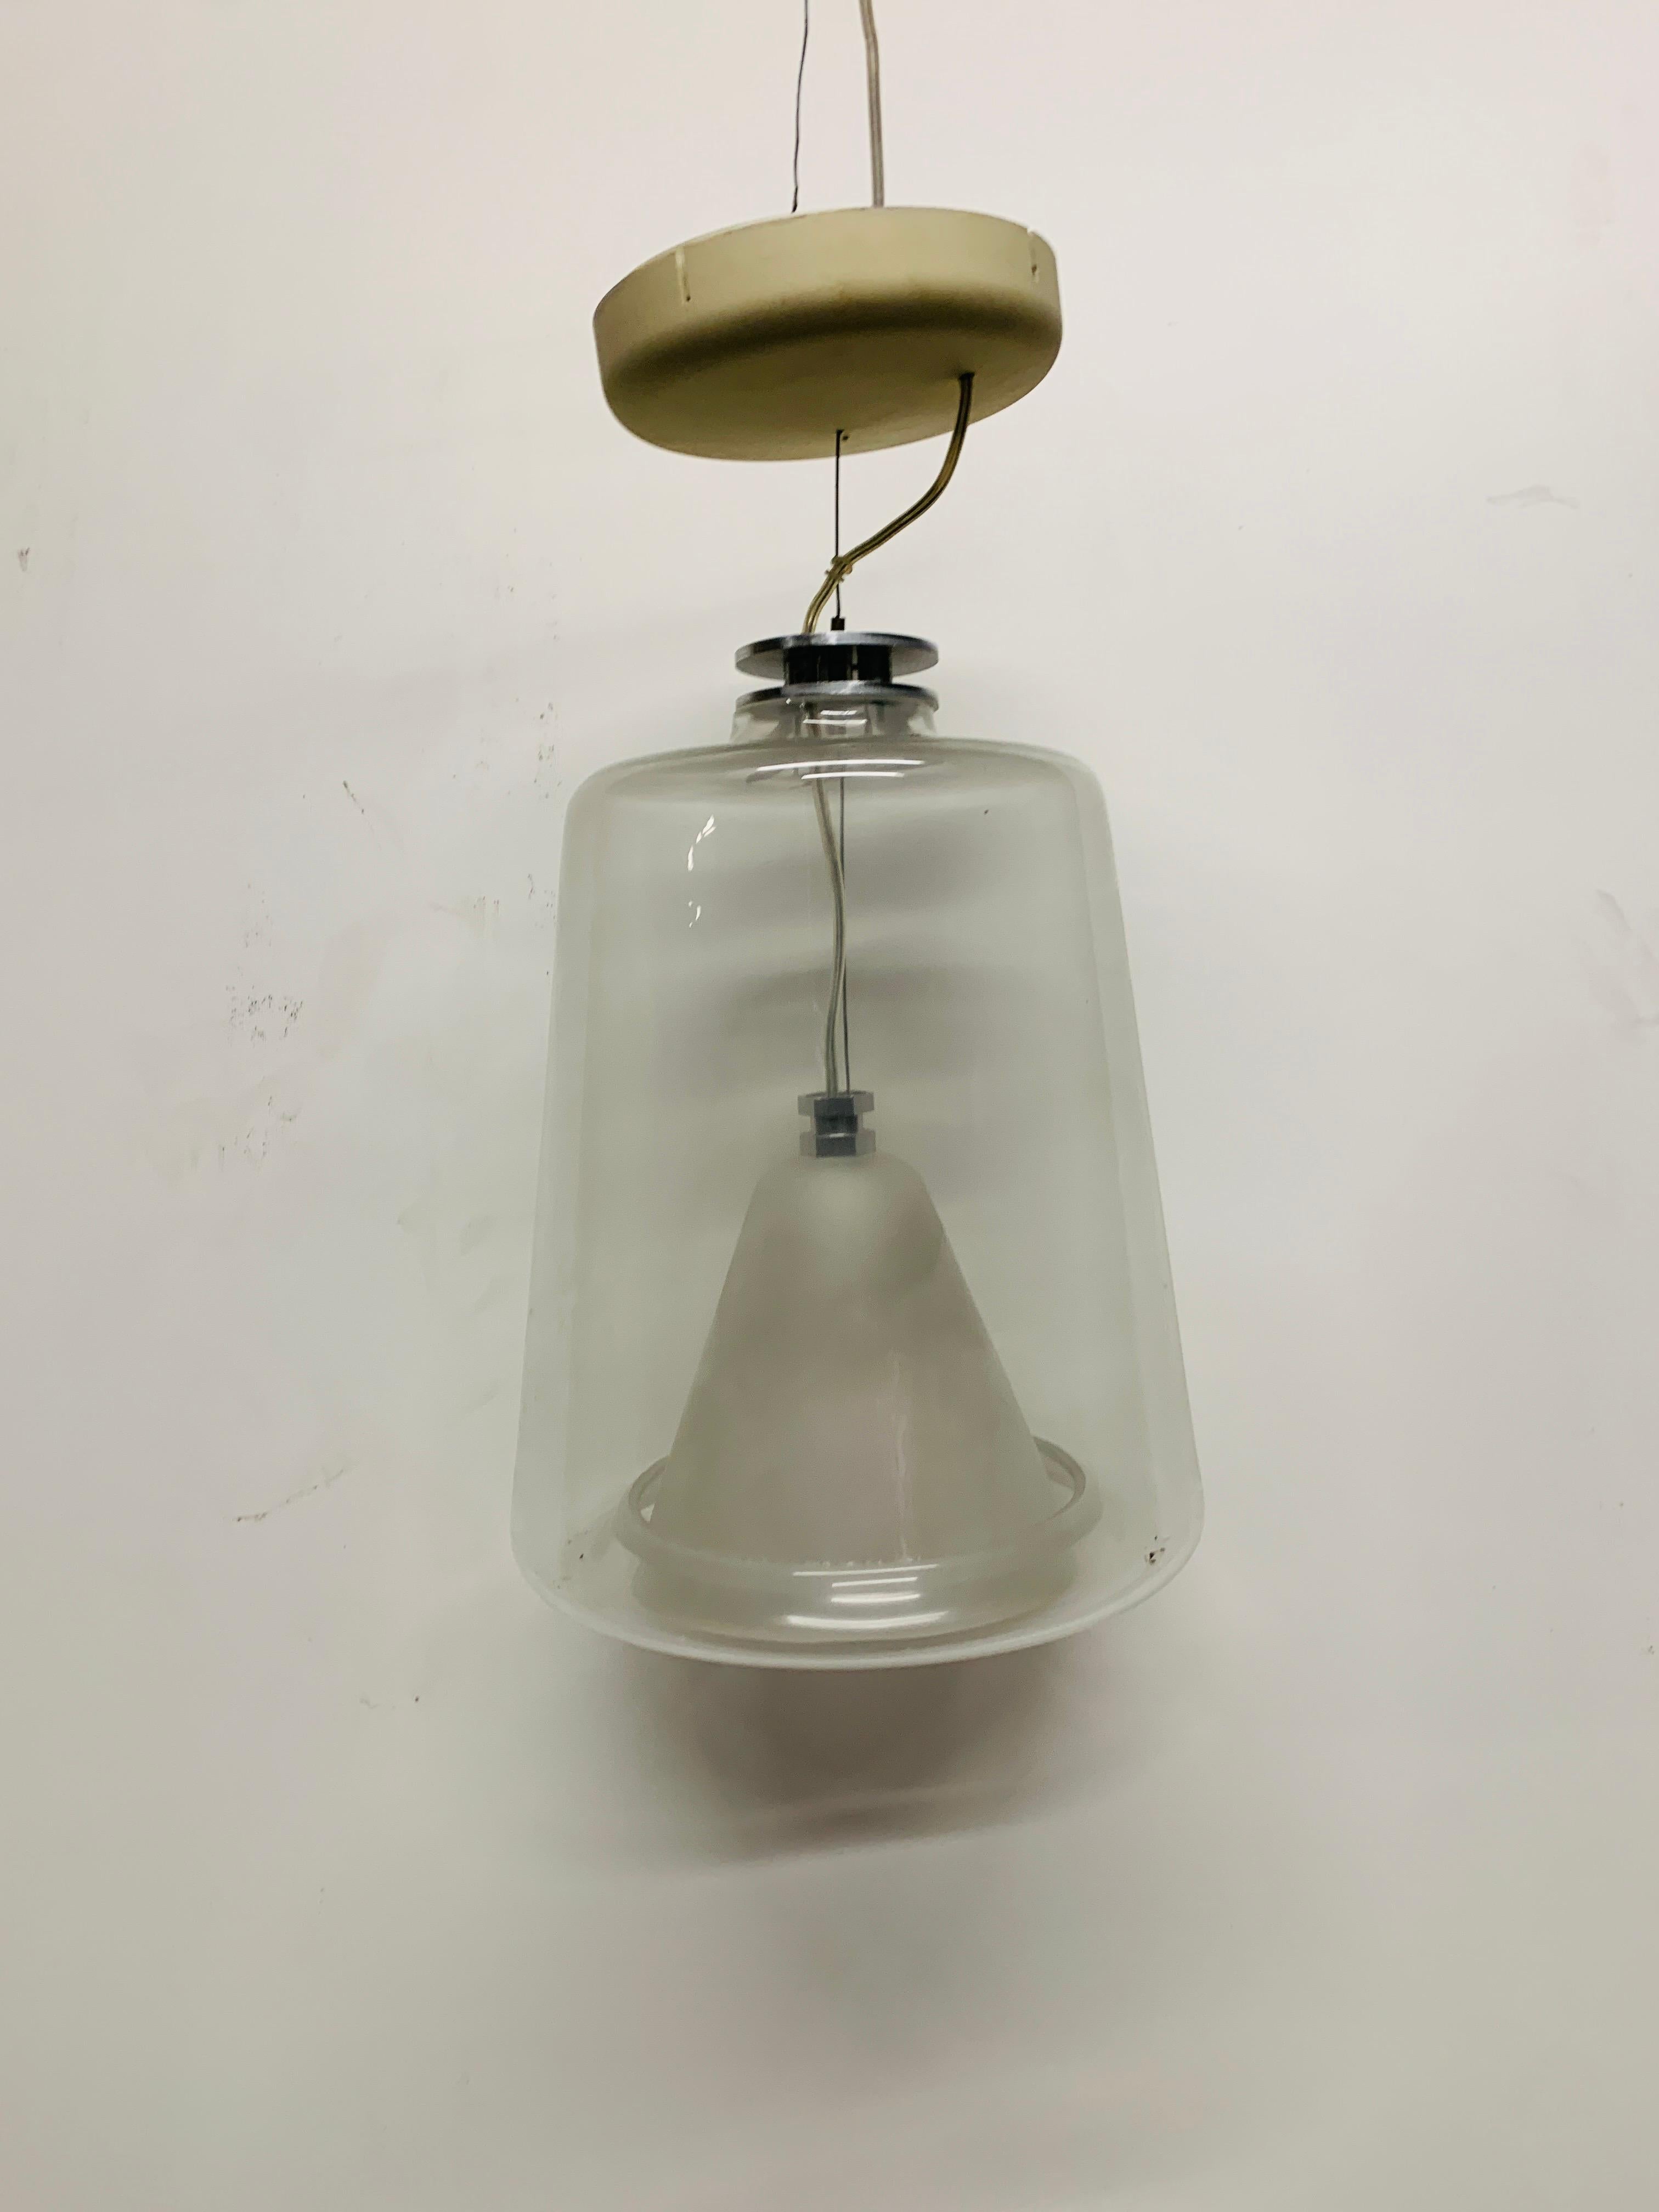 The Oluce Lanterna 477 is an award-winning pendant light. It is from 1998 and was designed by Laudani & Romanelli. The body of the Lanterna 477 is made of transparent and sandblasted glass. This is the larger lamp of this collection. The smaller